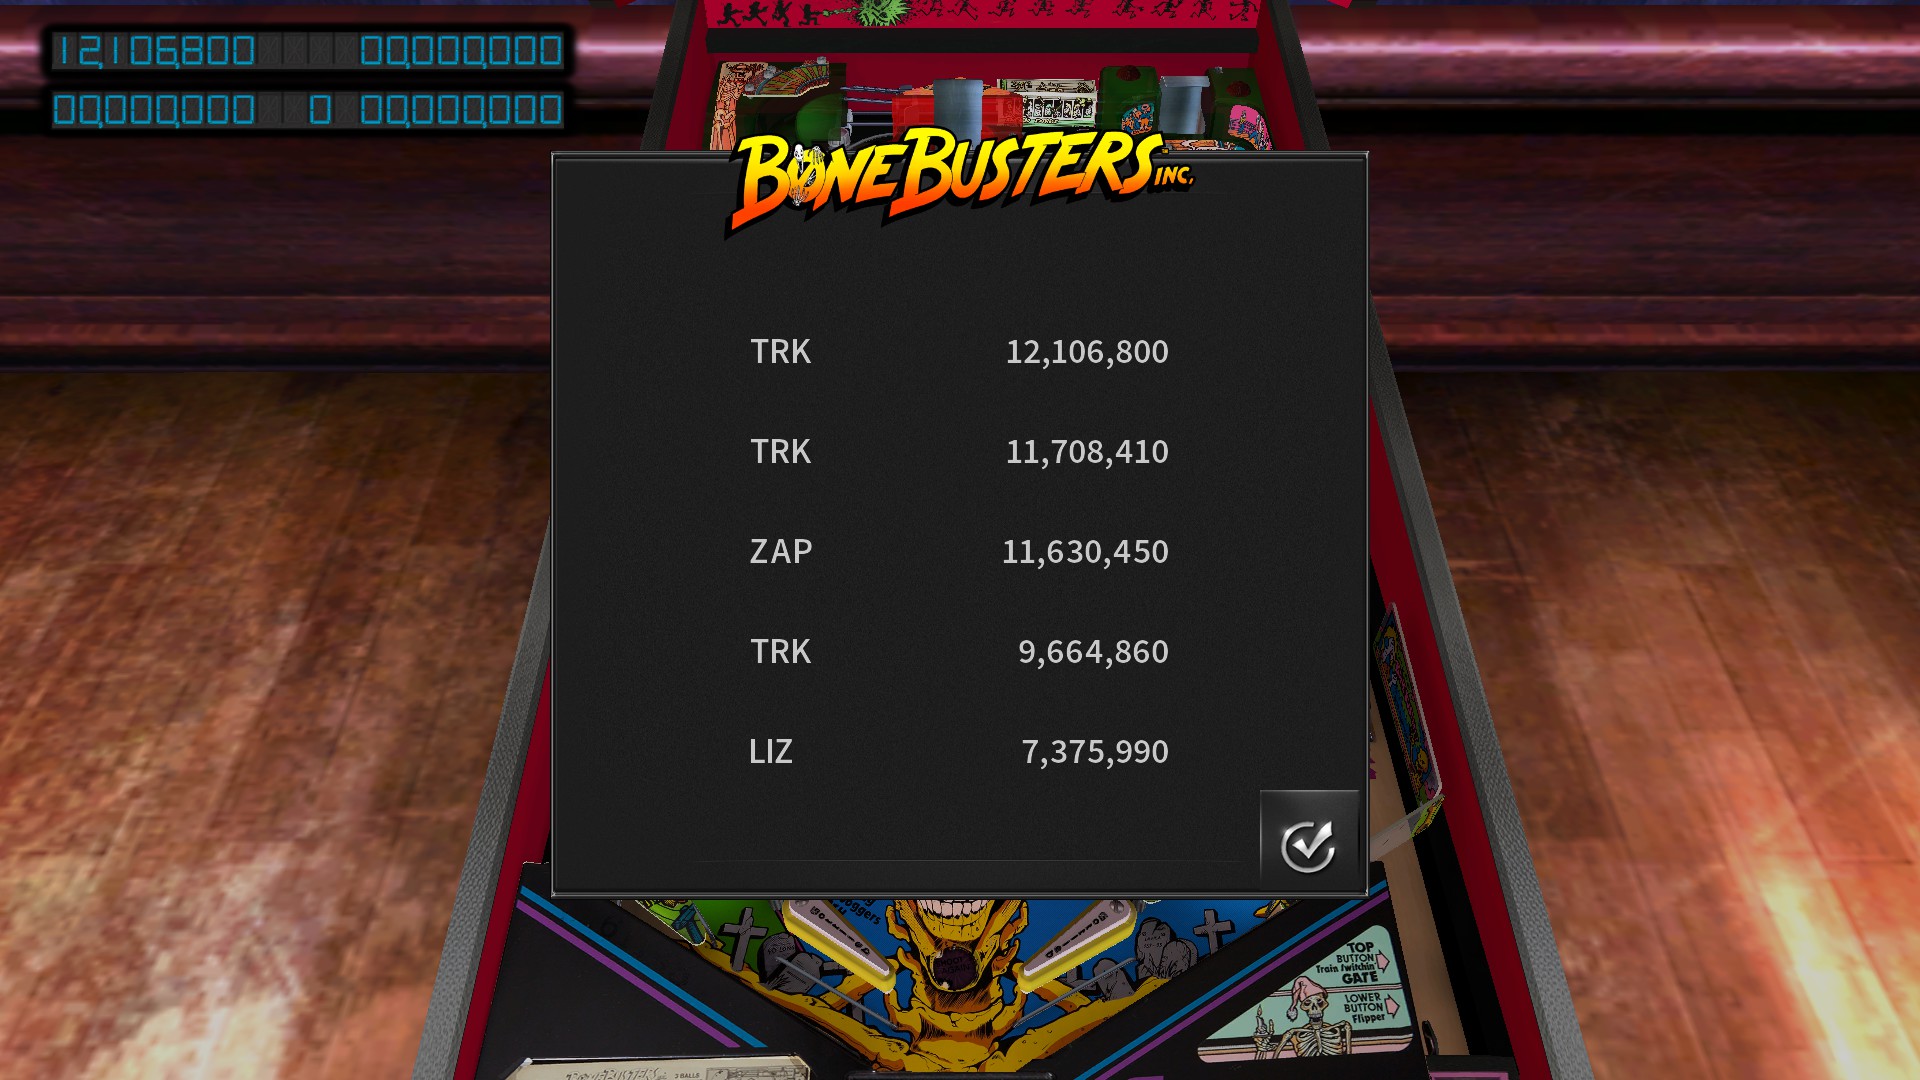 TheTrickster: Pinball Arcade: Bone Busters (PC) 12,106,800 points on 2016-11-23 04:52:43